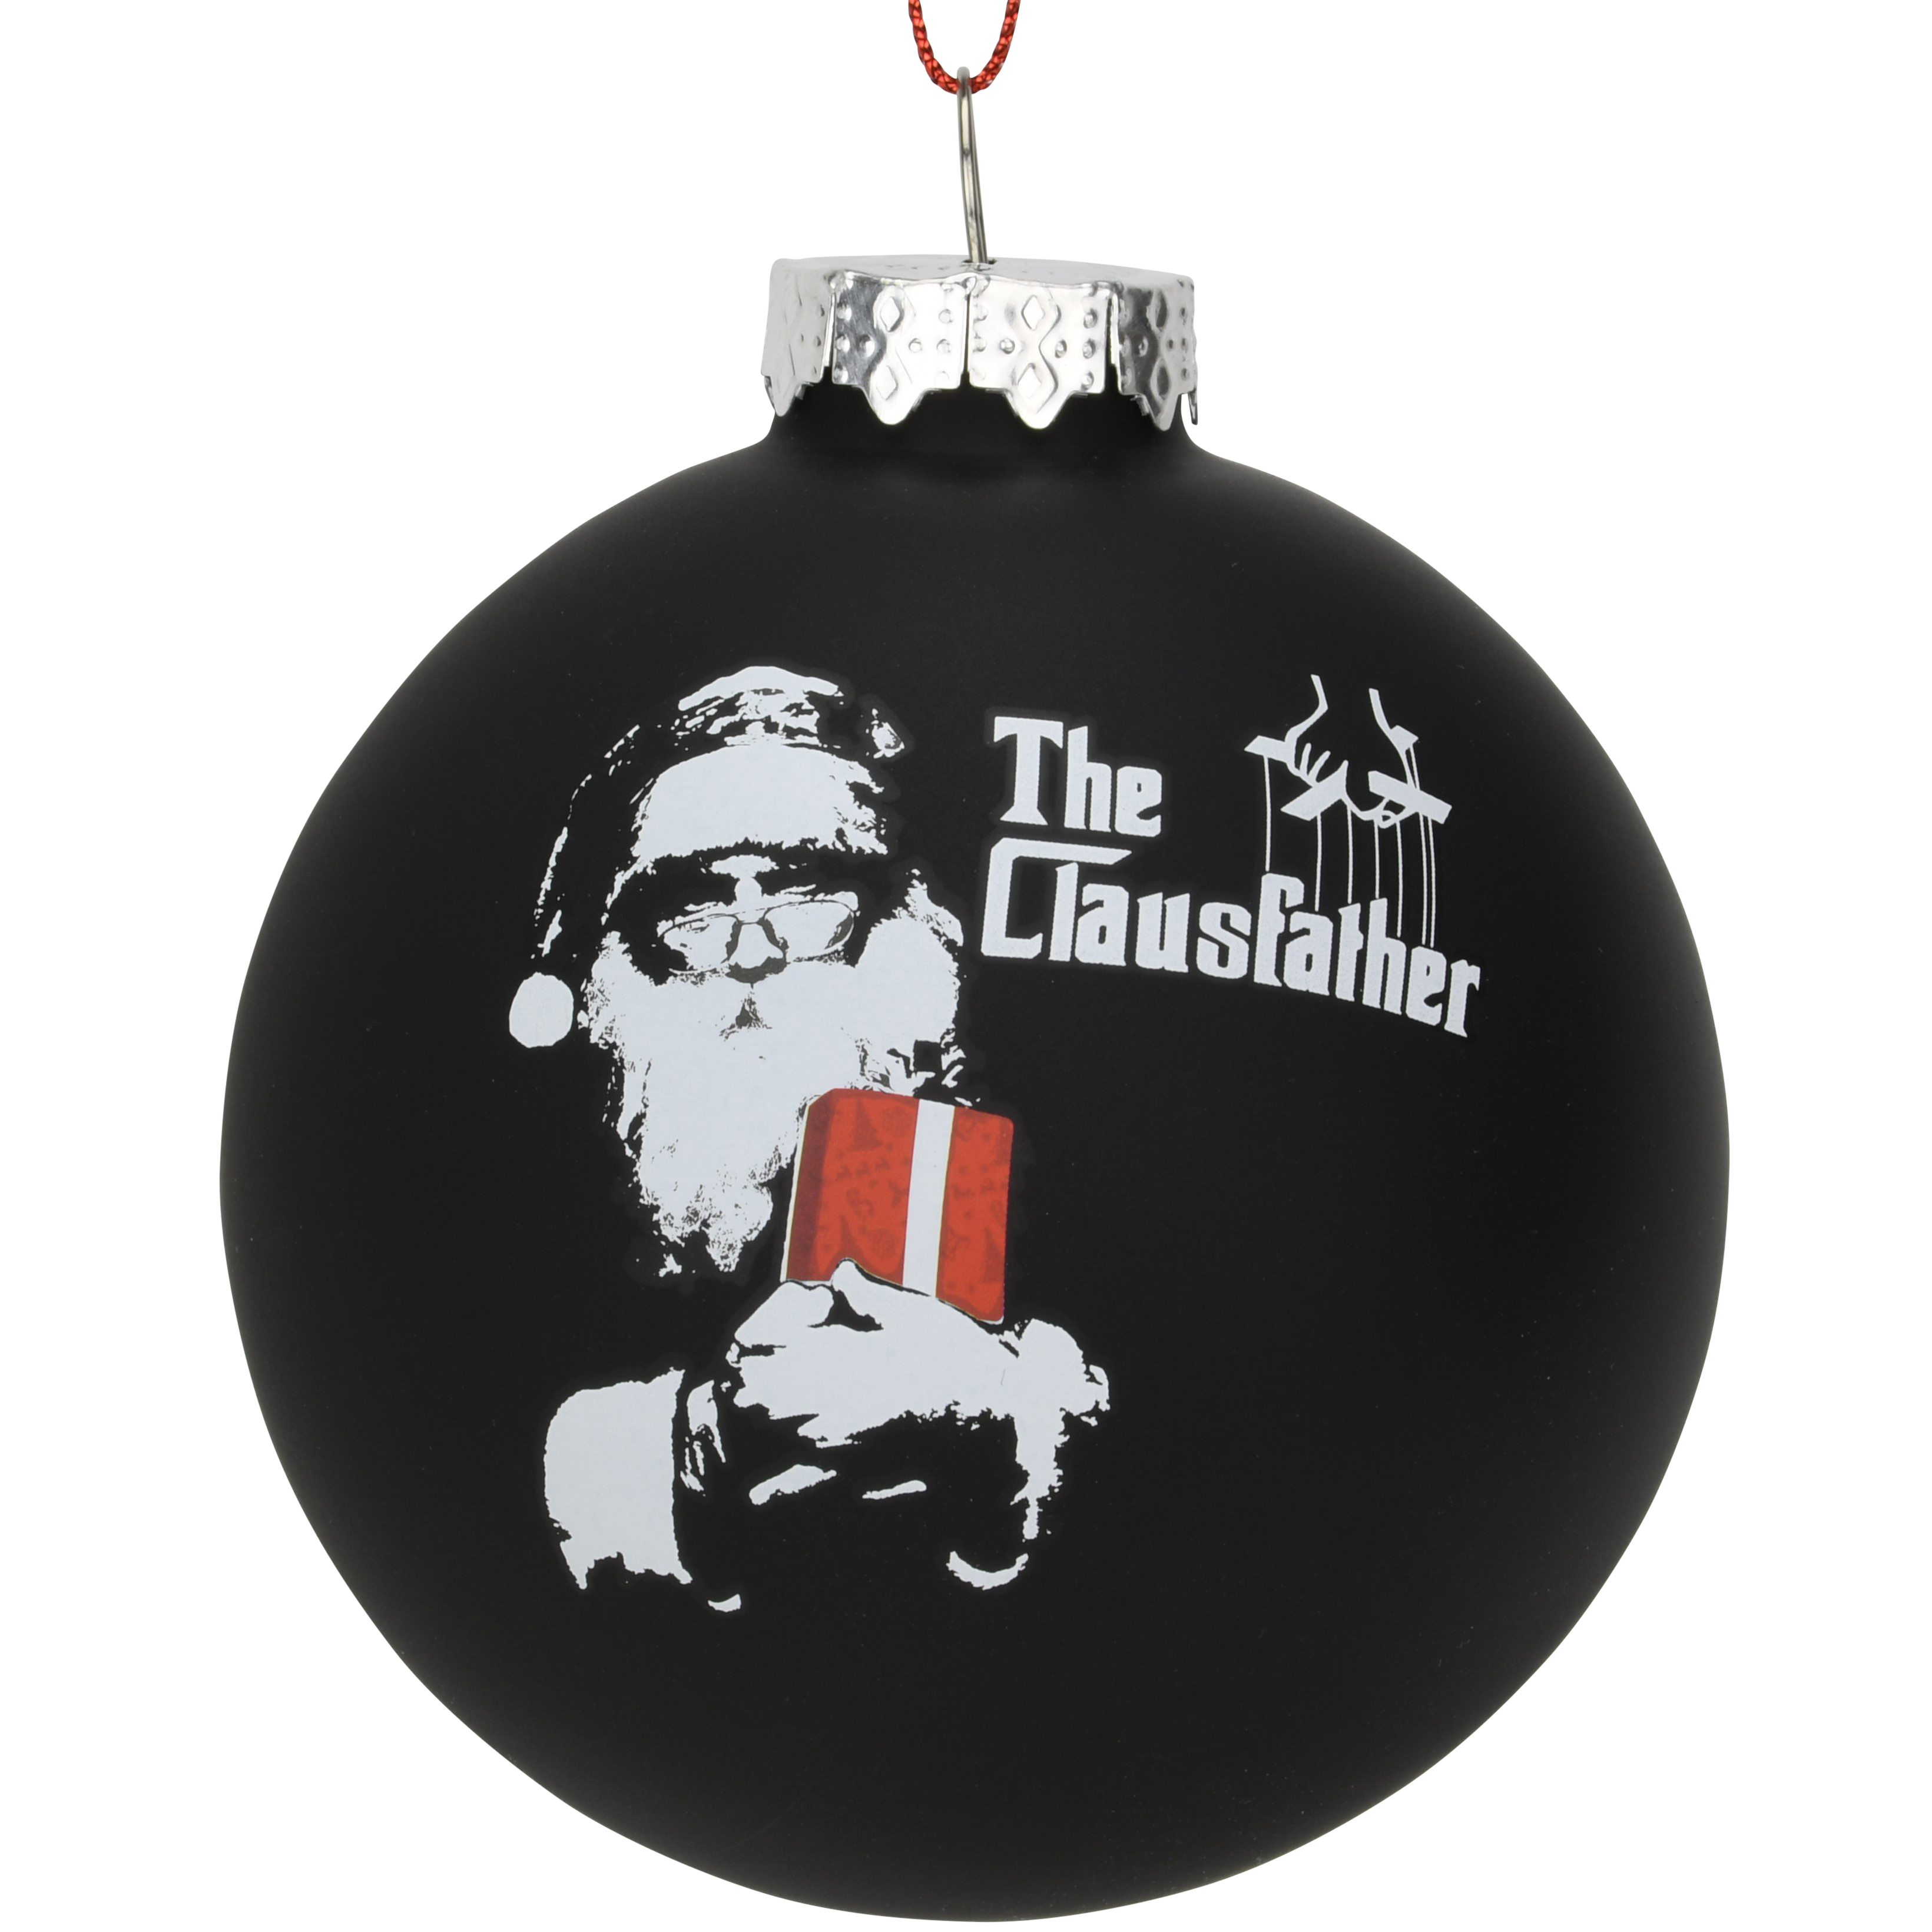 The Clausfather Movie Poster Parody Funny Glass Christmas Ornament